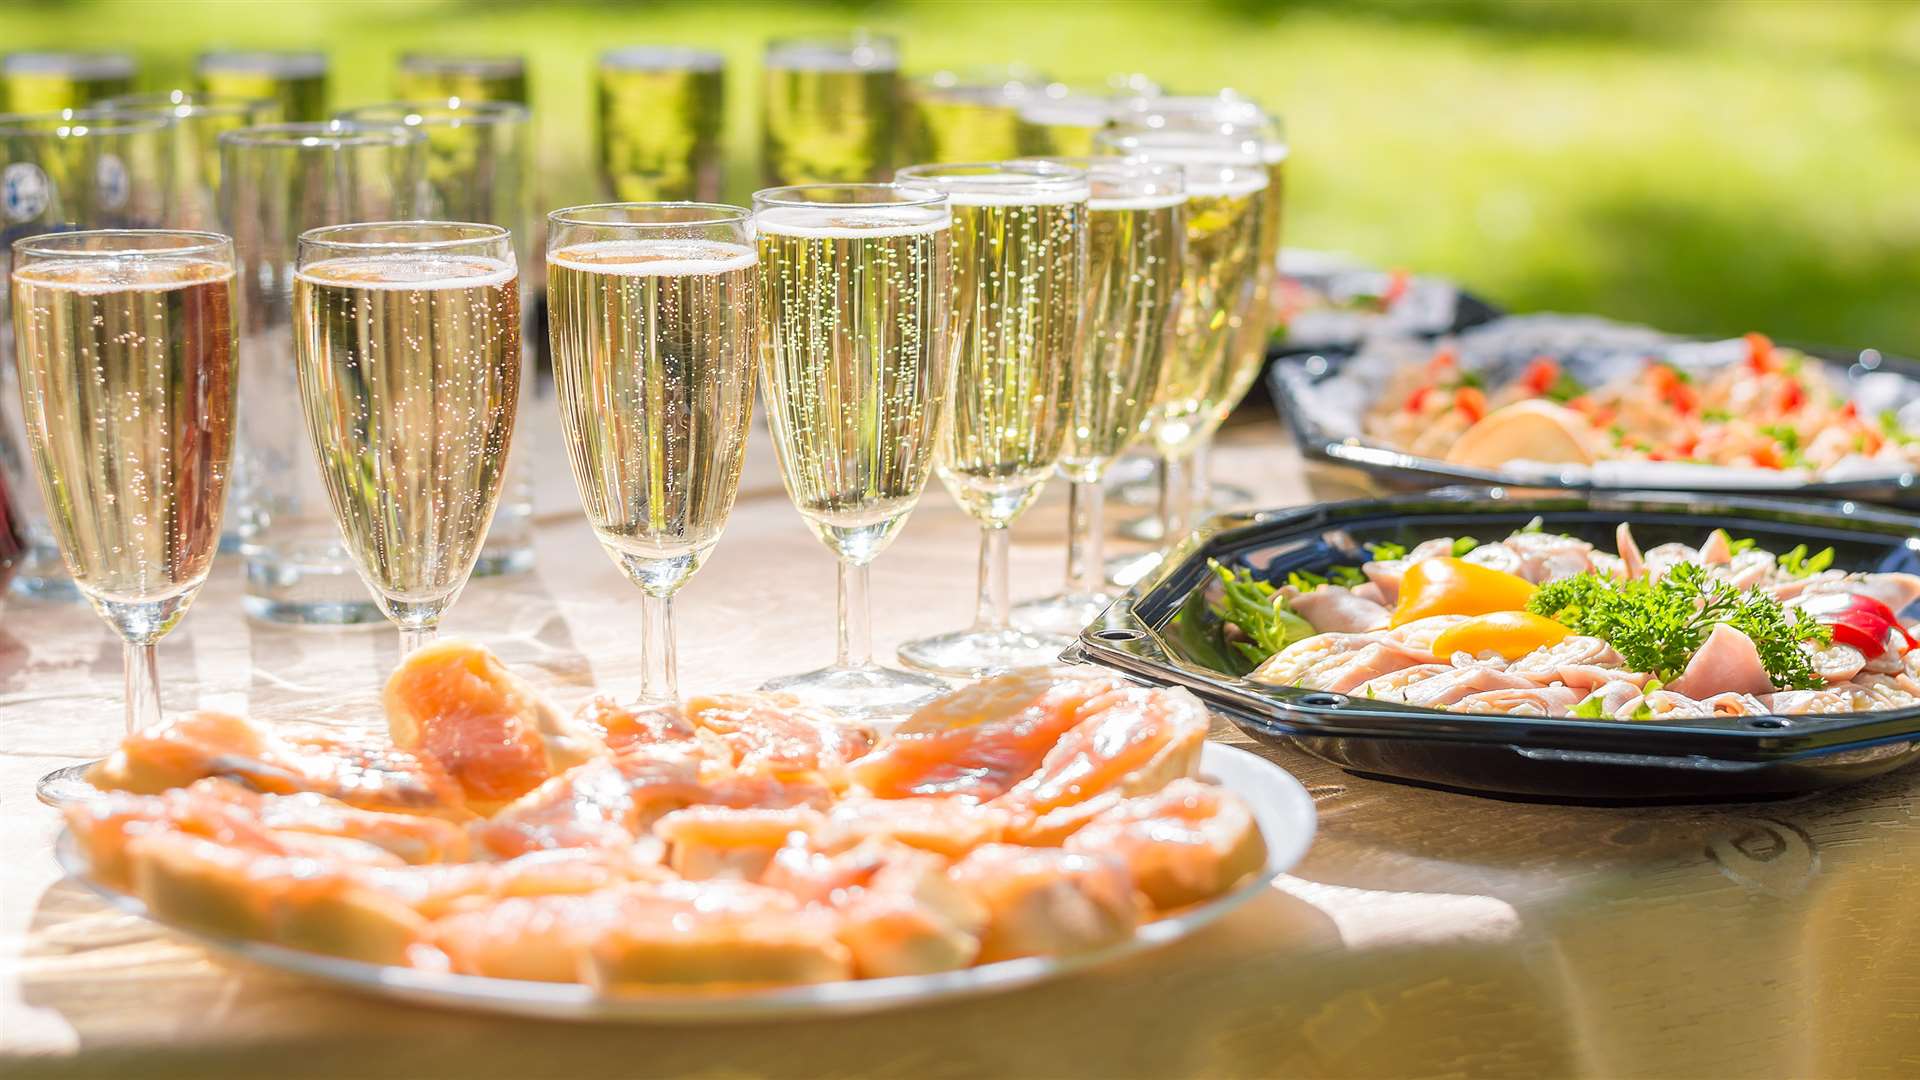 Your style of catering is an important part of your reception